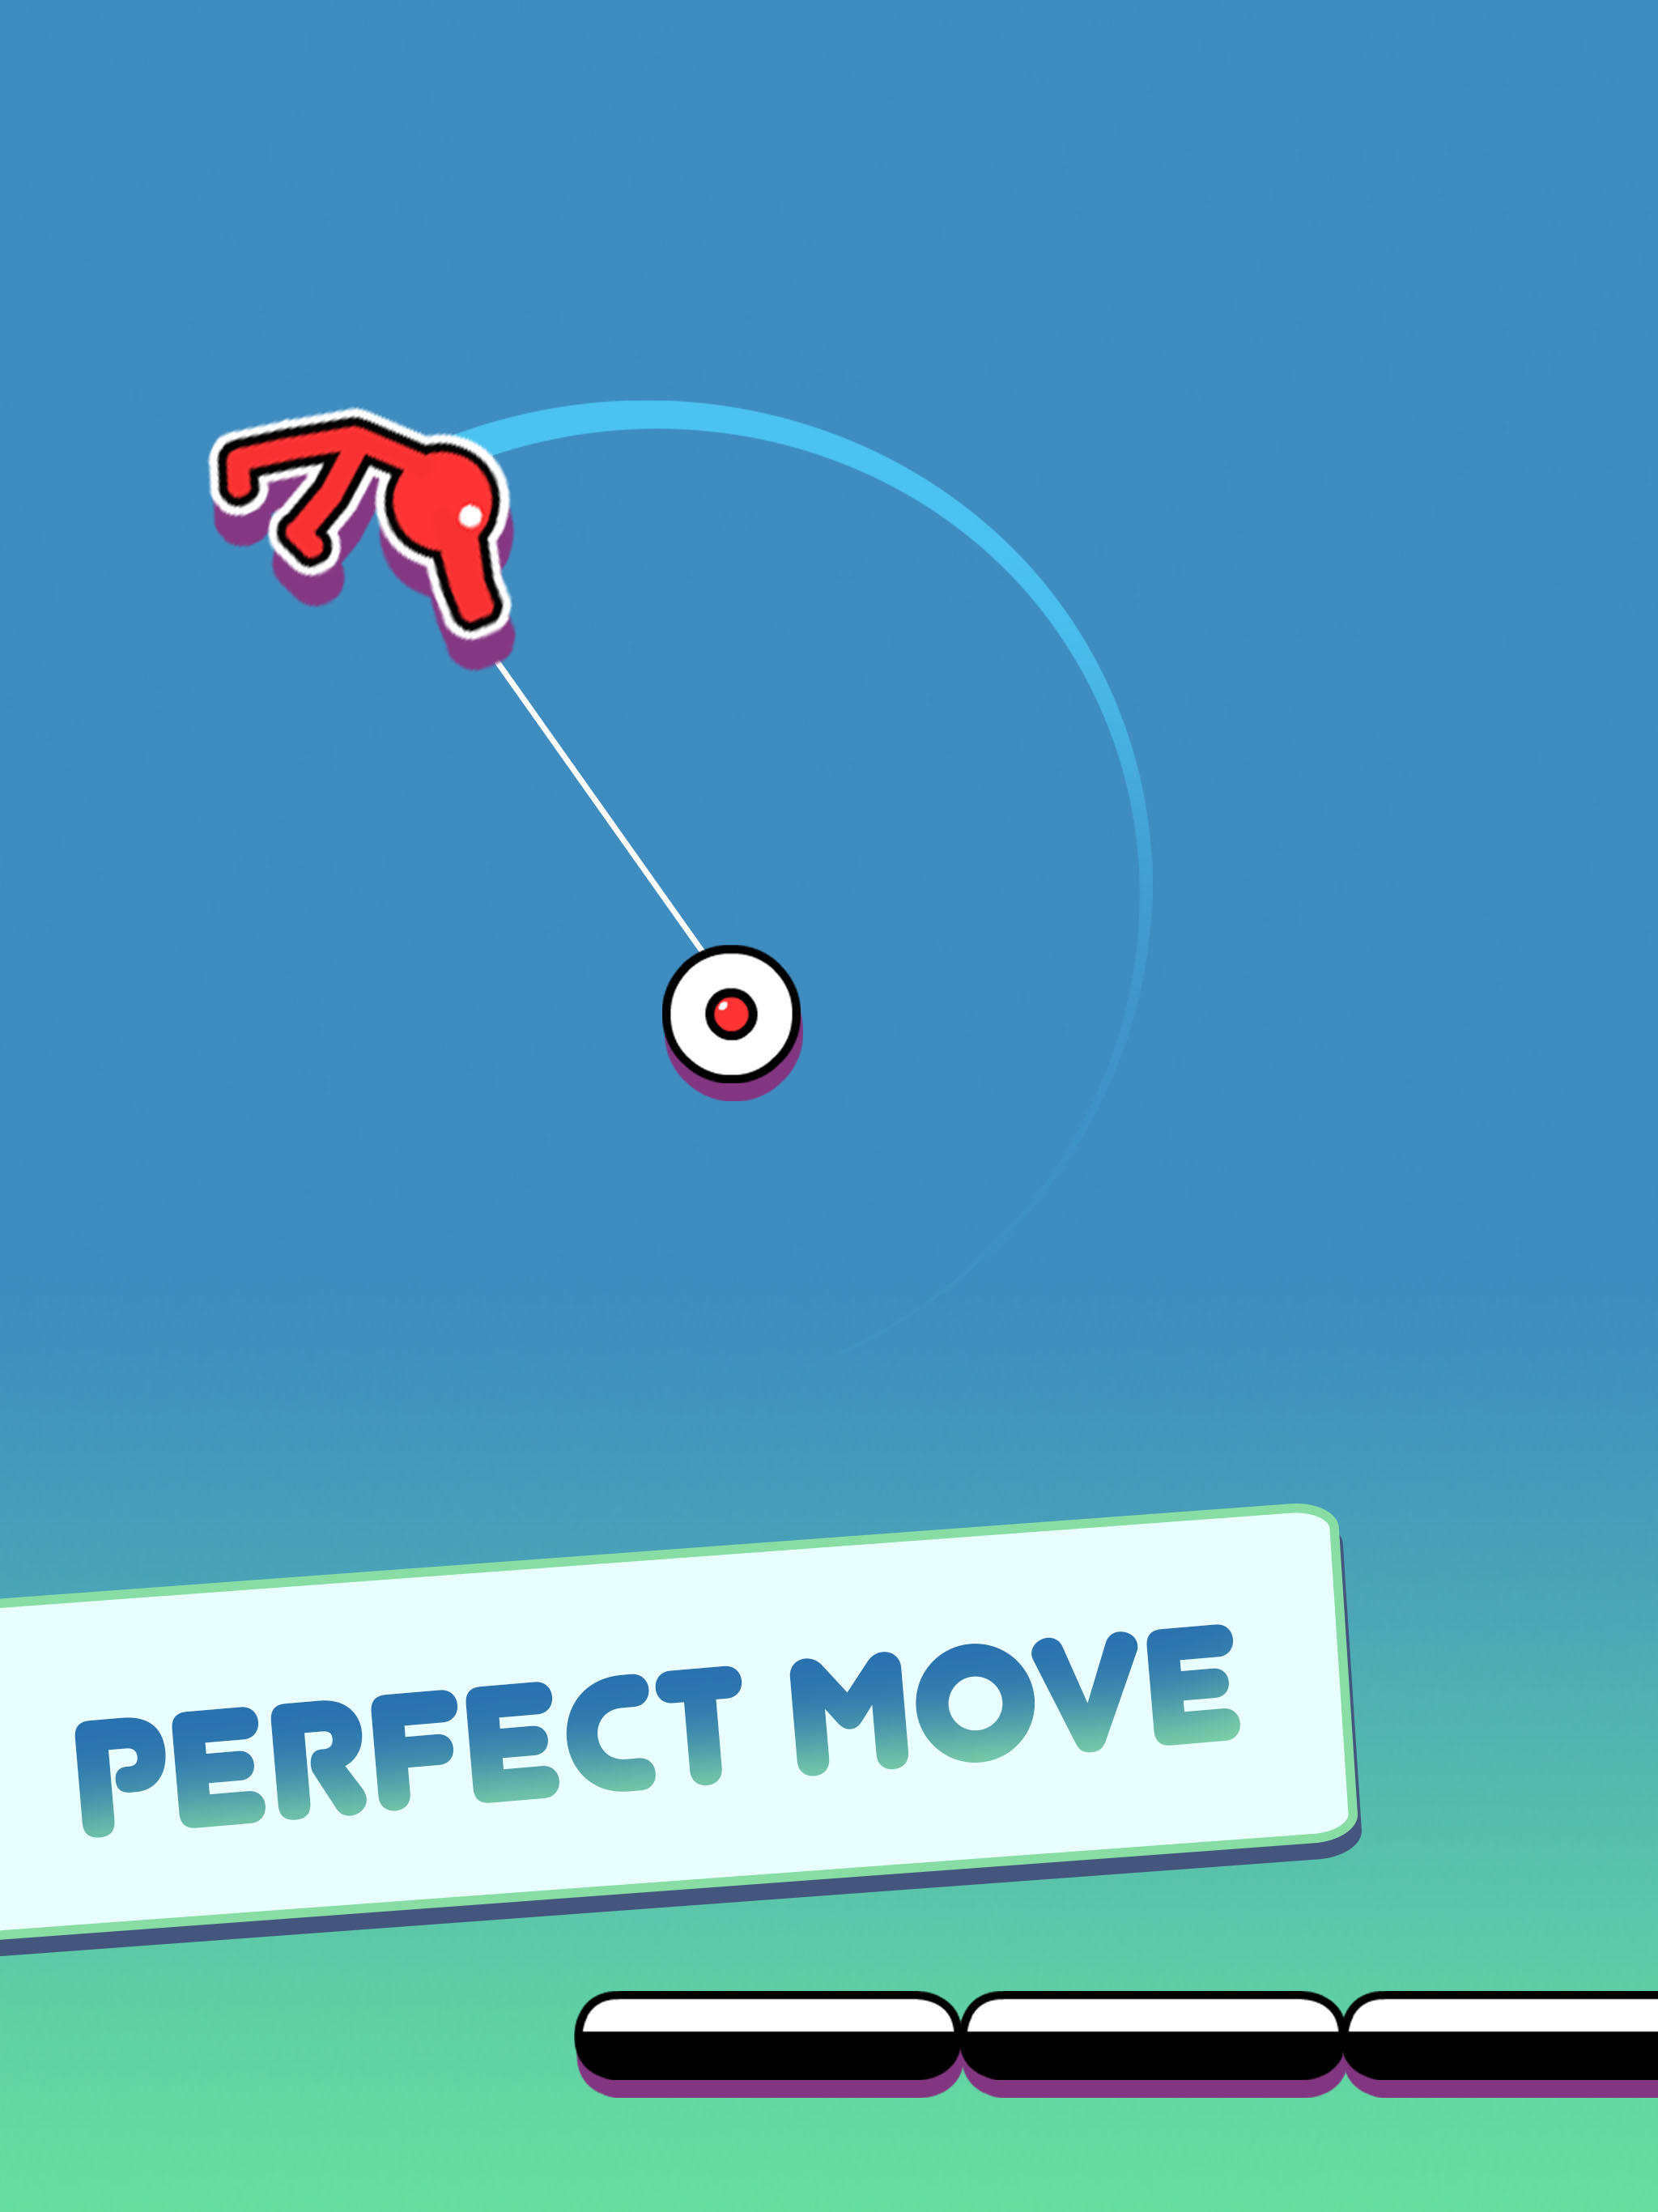 Stickman Hook APK for Android - Download